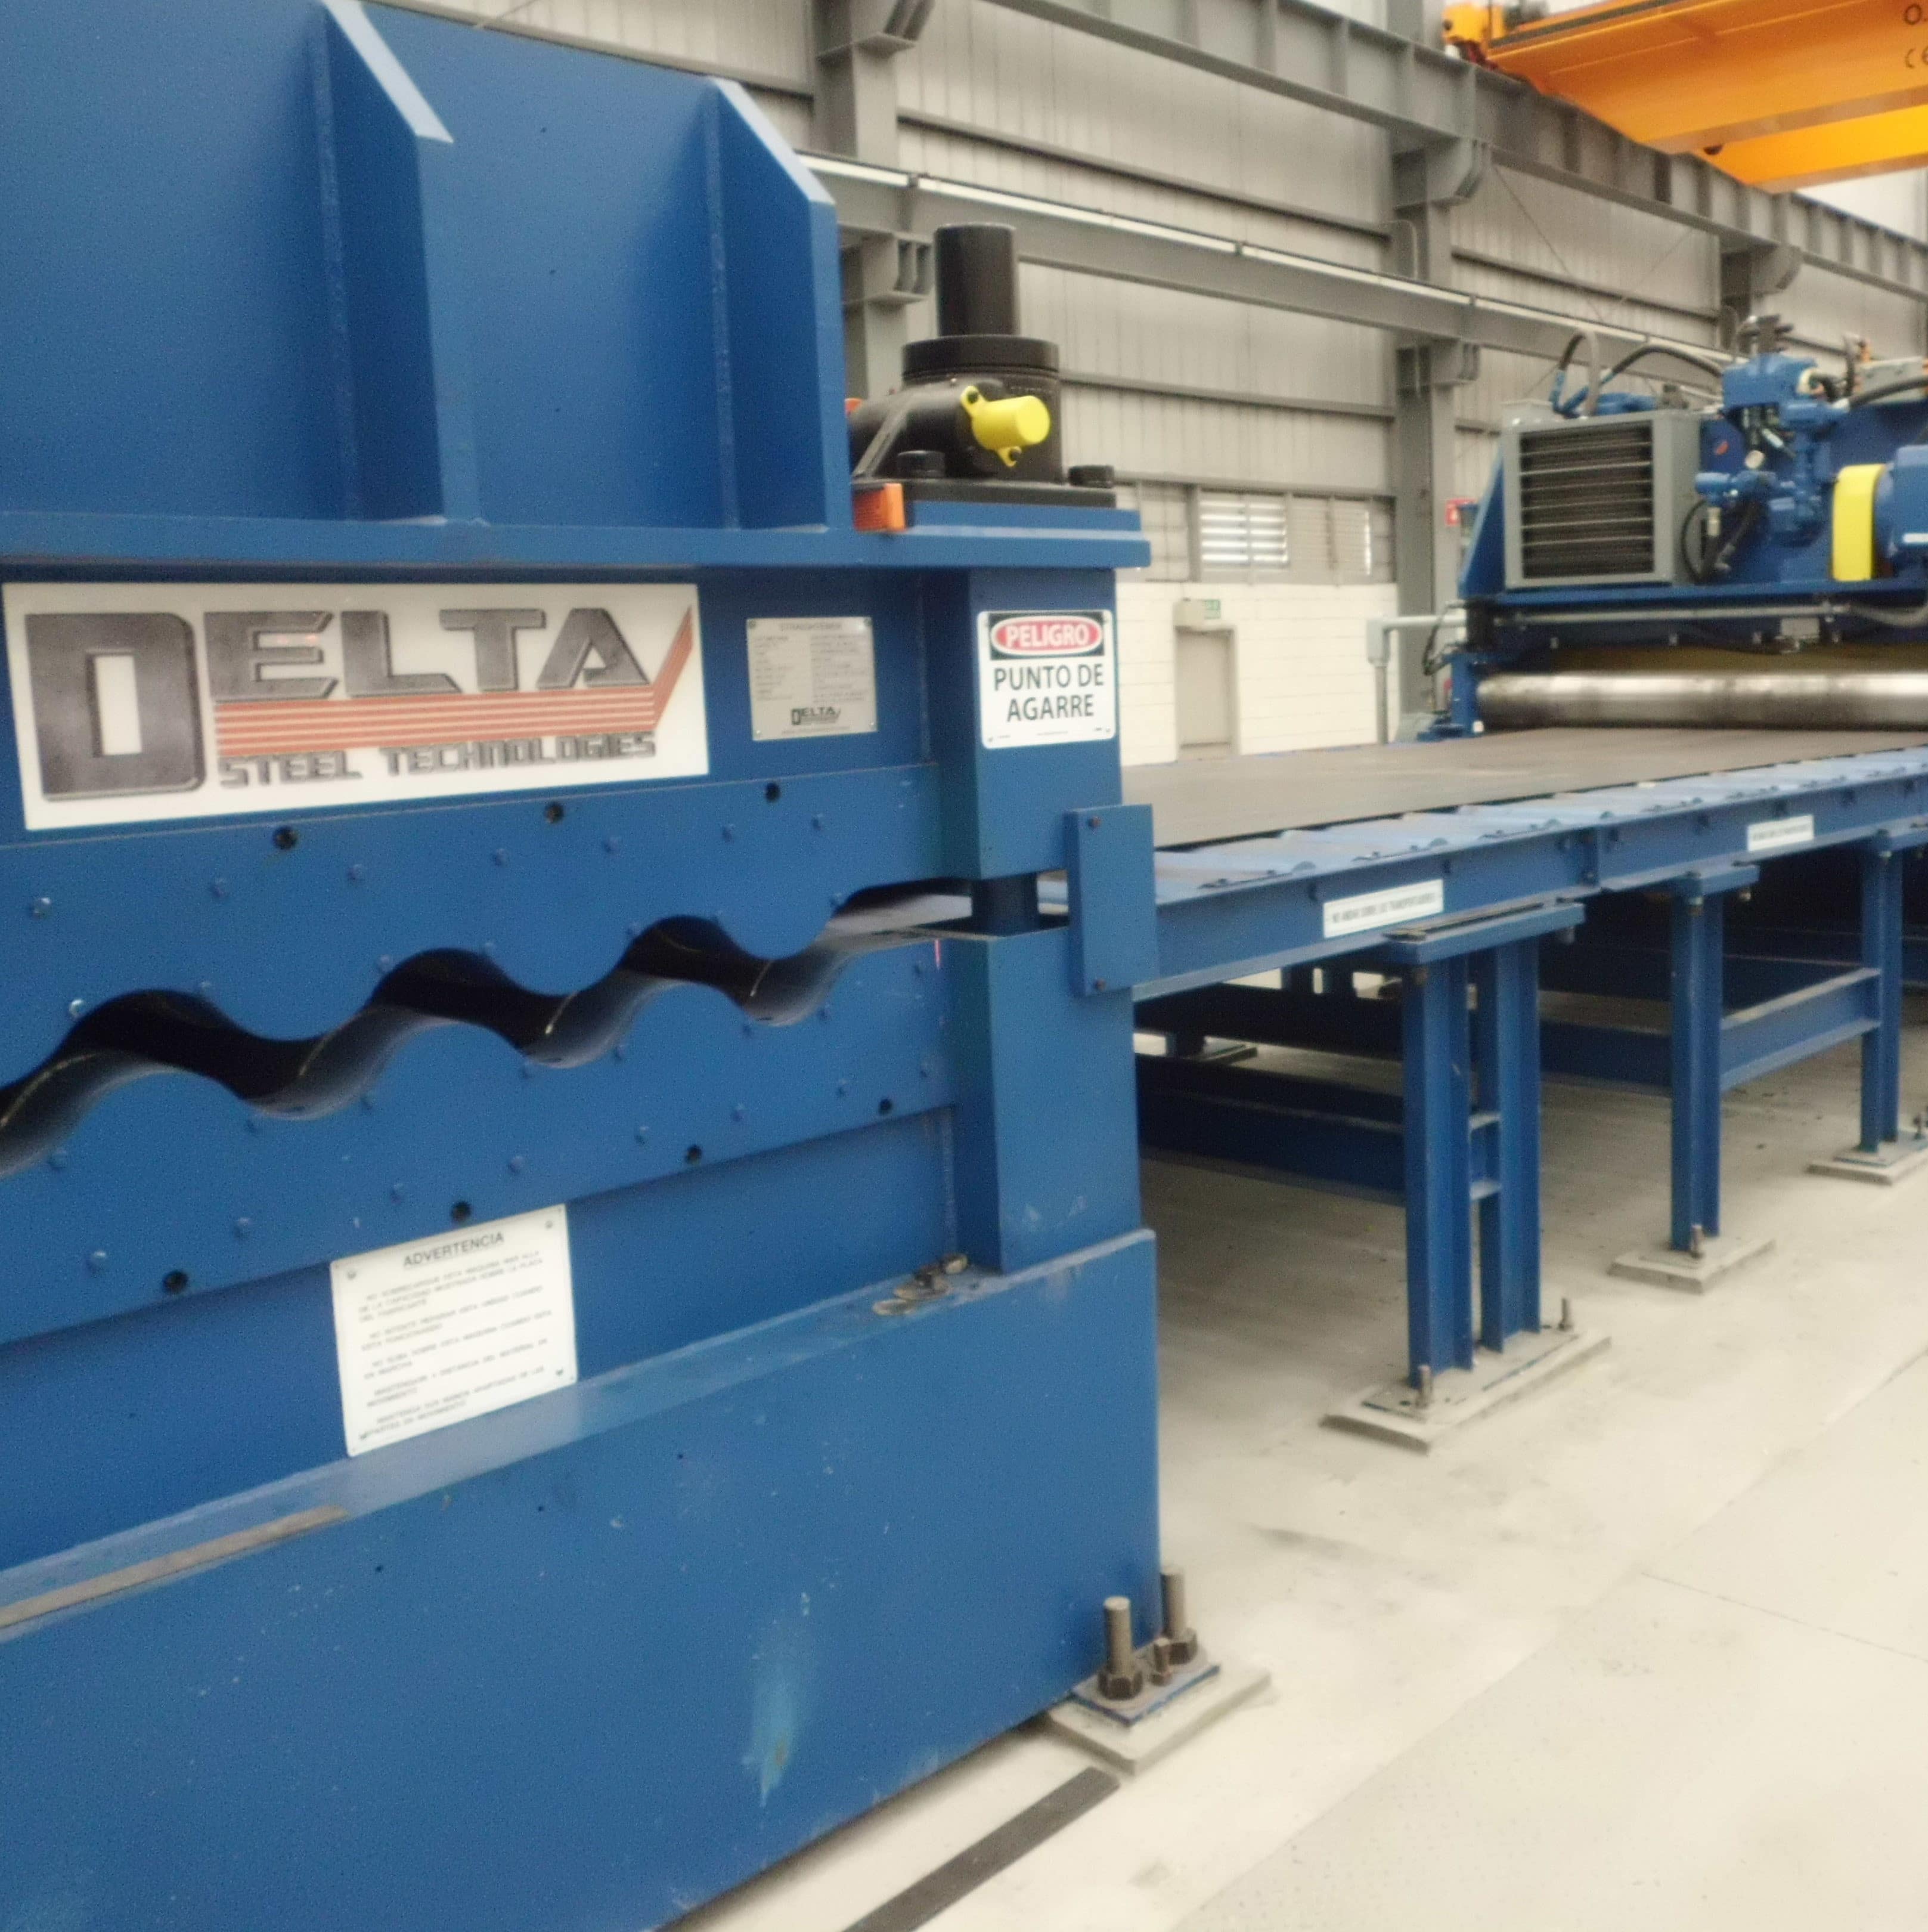 New Cut-To-Length Line Manufacturing Equipment | Delta Steel Technologies